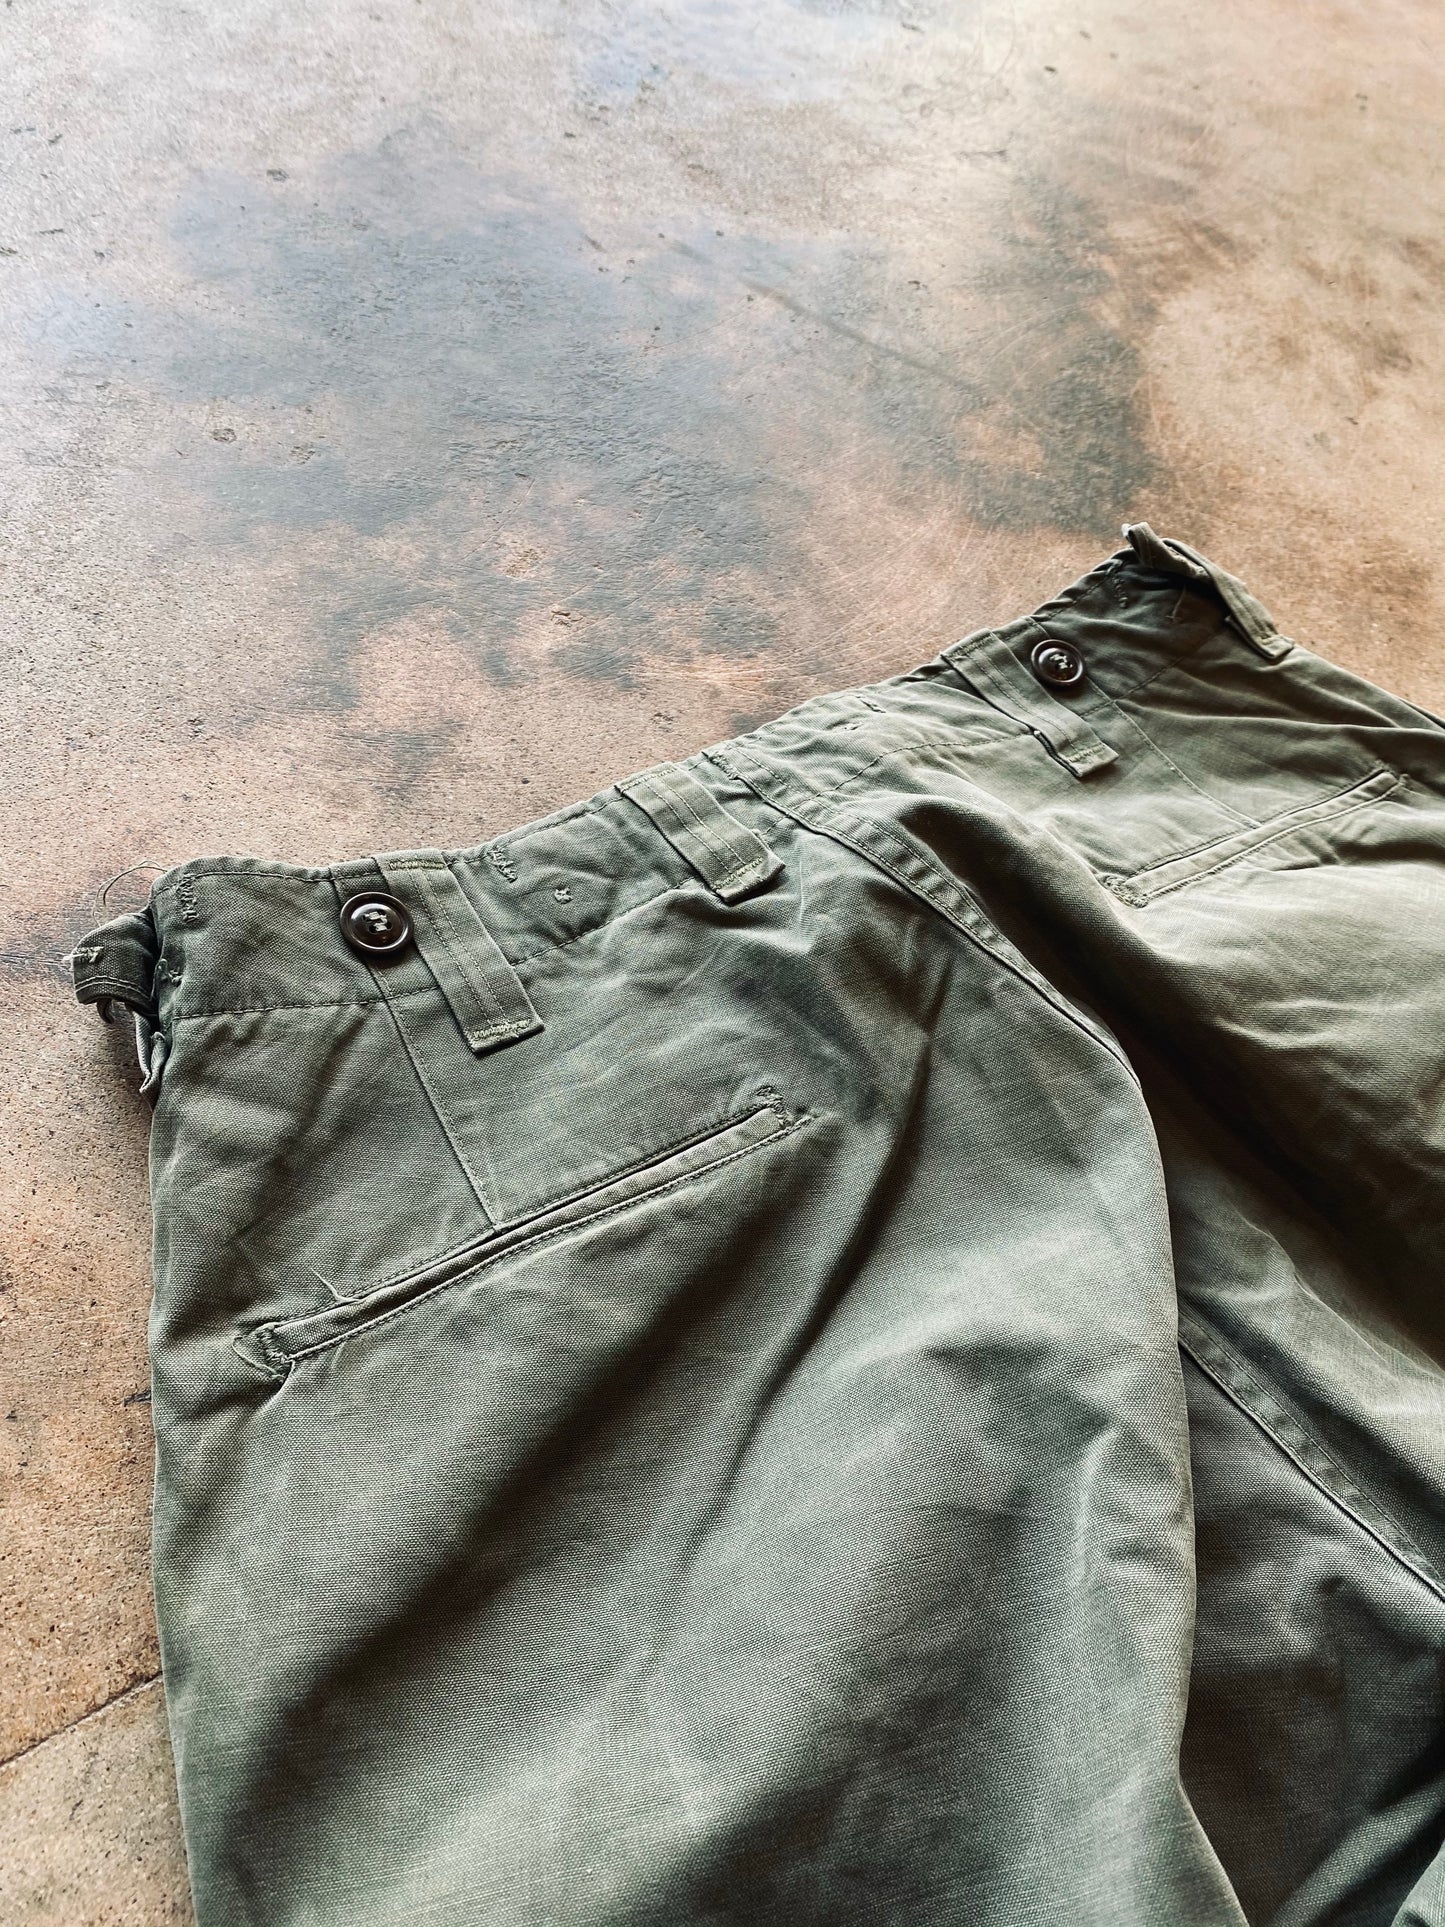 1940s-50s US Army Field Trouser